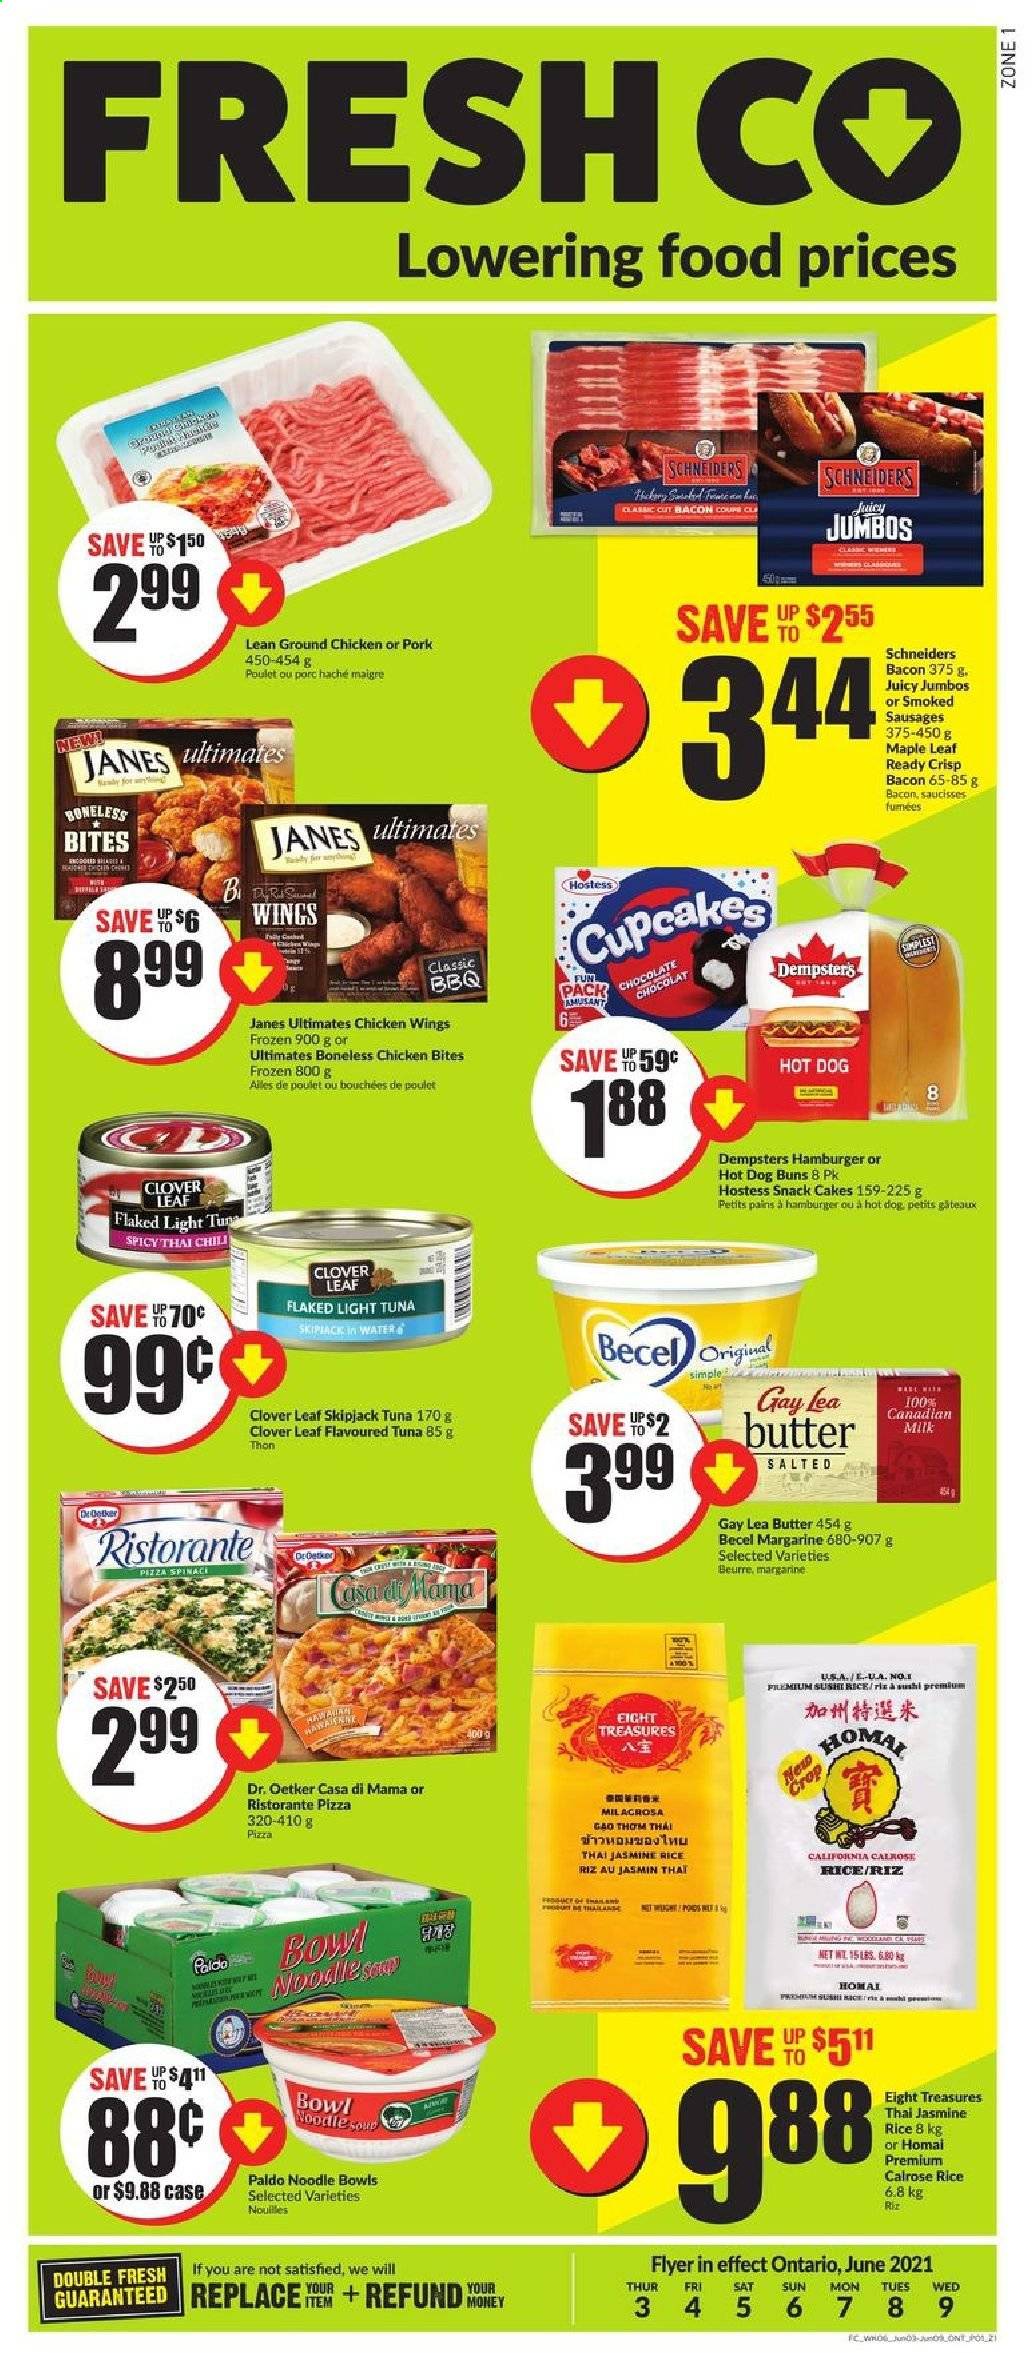 thumbnail - FreshCo. Flyer - June 03, 2021 - June 09, 2021 - Sales products - cake, buns, cupcake, tuna, pizza, soup, hamburger, noodles cup, noodles, bacon, sausage, Dr. Oetker, Clover, milk, butter, margarine, chicken wings, chicken bites, chocolate, snack, light tuna, jasmine rice, ground chicken, chicken. Page 1.